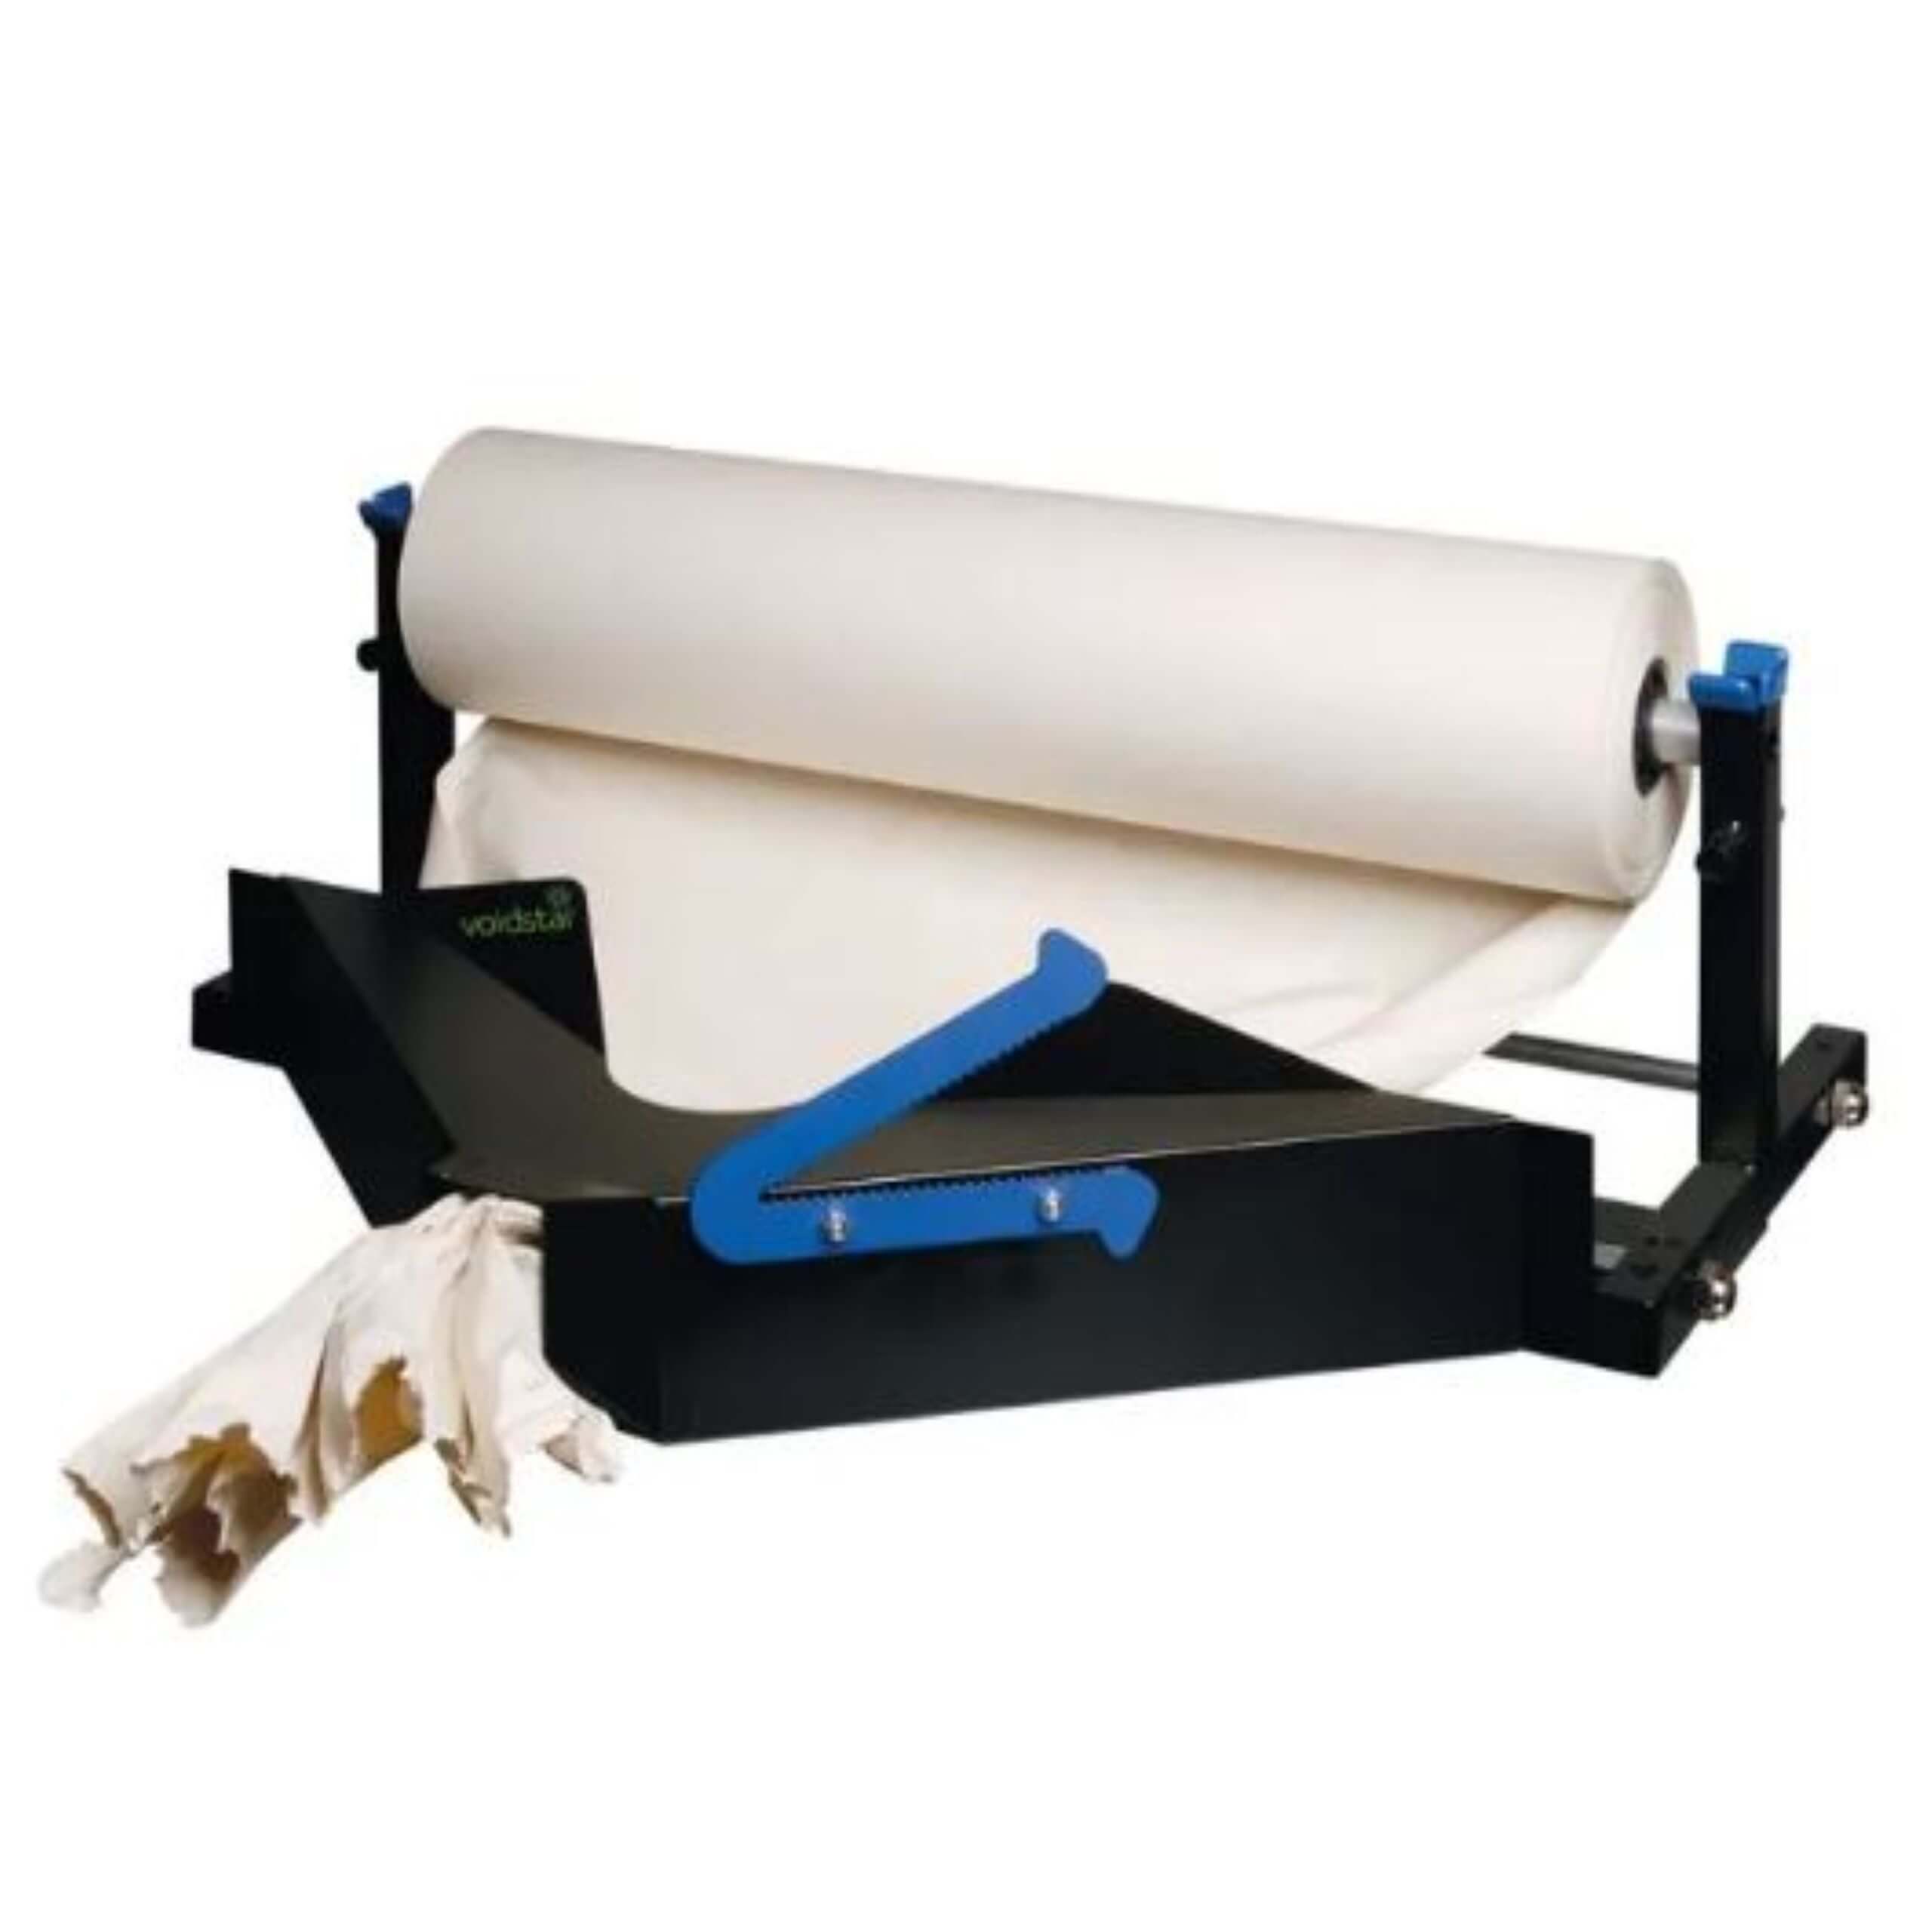 An image of a Void Fill Paper Dispenser.